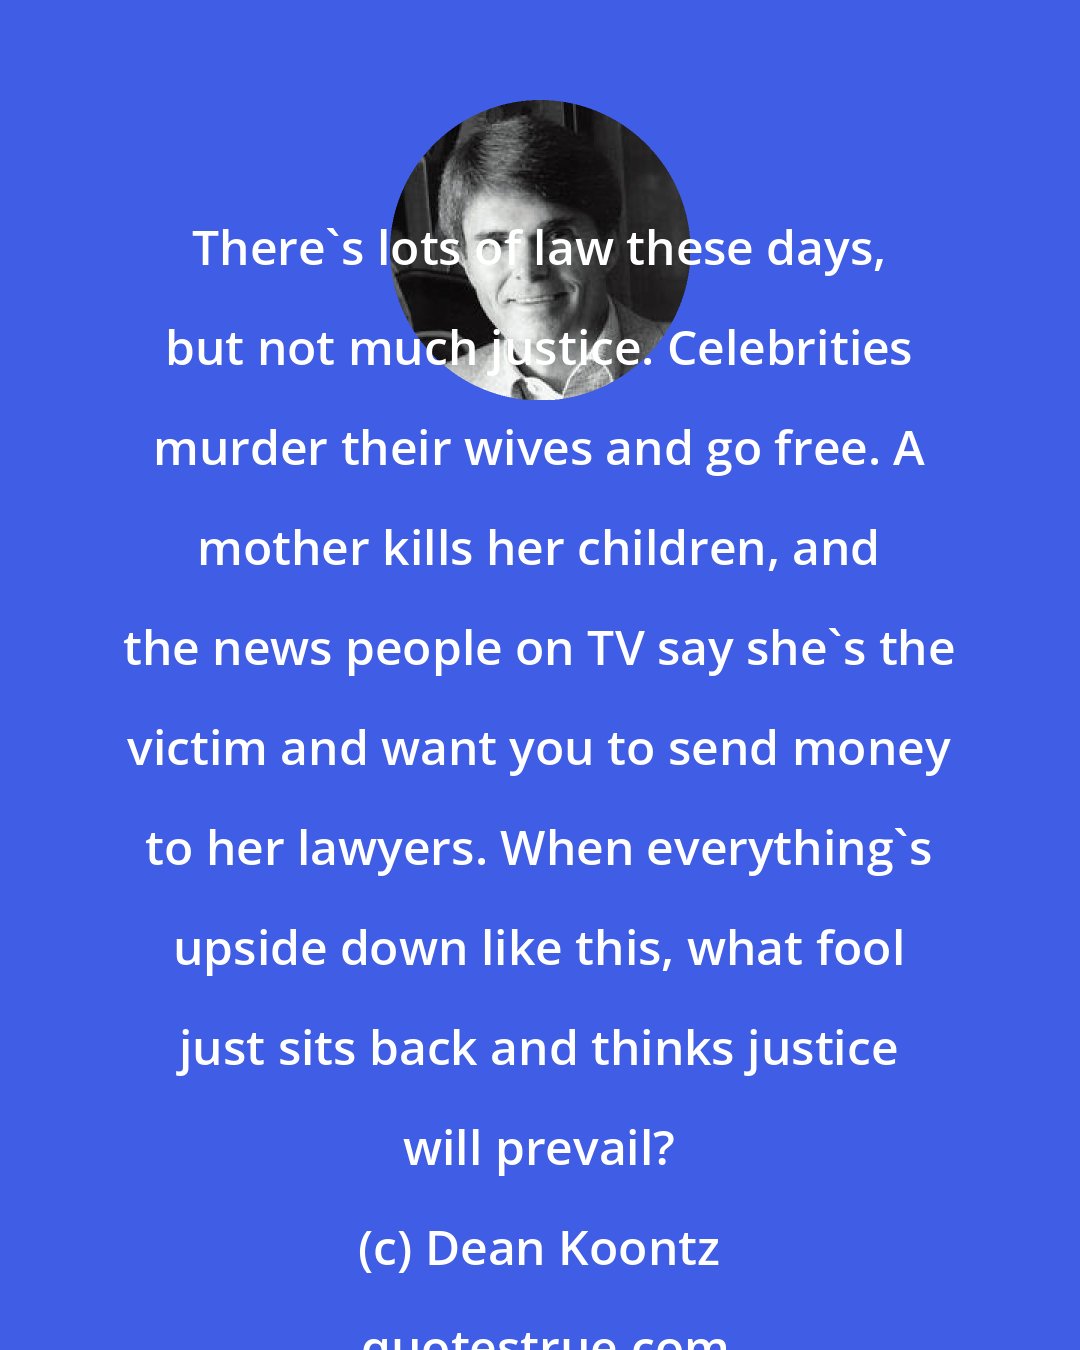 Dean Koontz: There's lots of law these days, but not much justice. Celebrities murder their wives and go free. A mother kills her children, and the news people on TV say she's the victim and want you to send money to her lawyers. When everything's upside down like this, what fool just sits back and thinks justice will prevail?